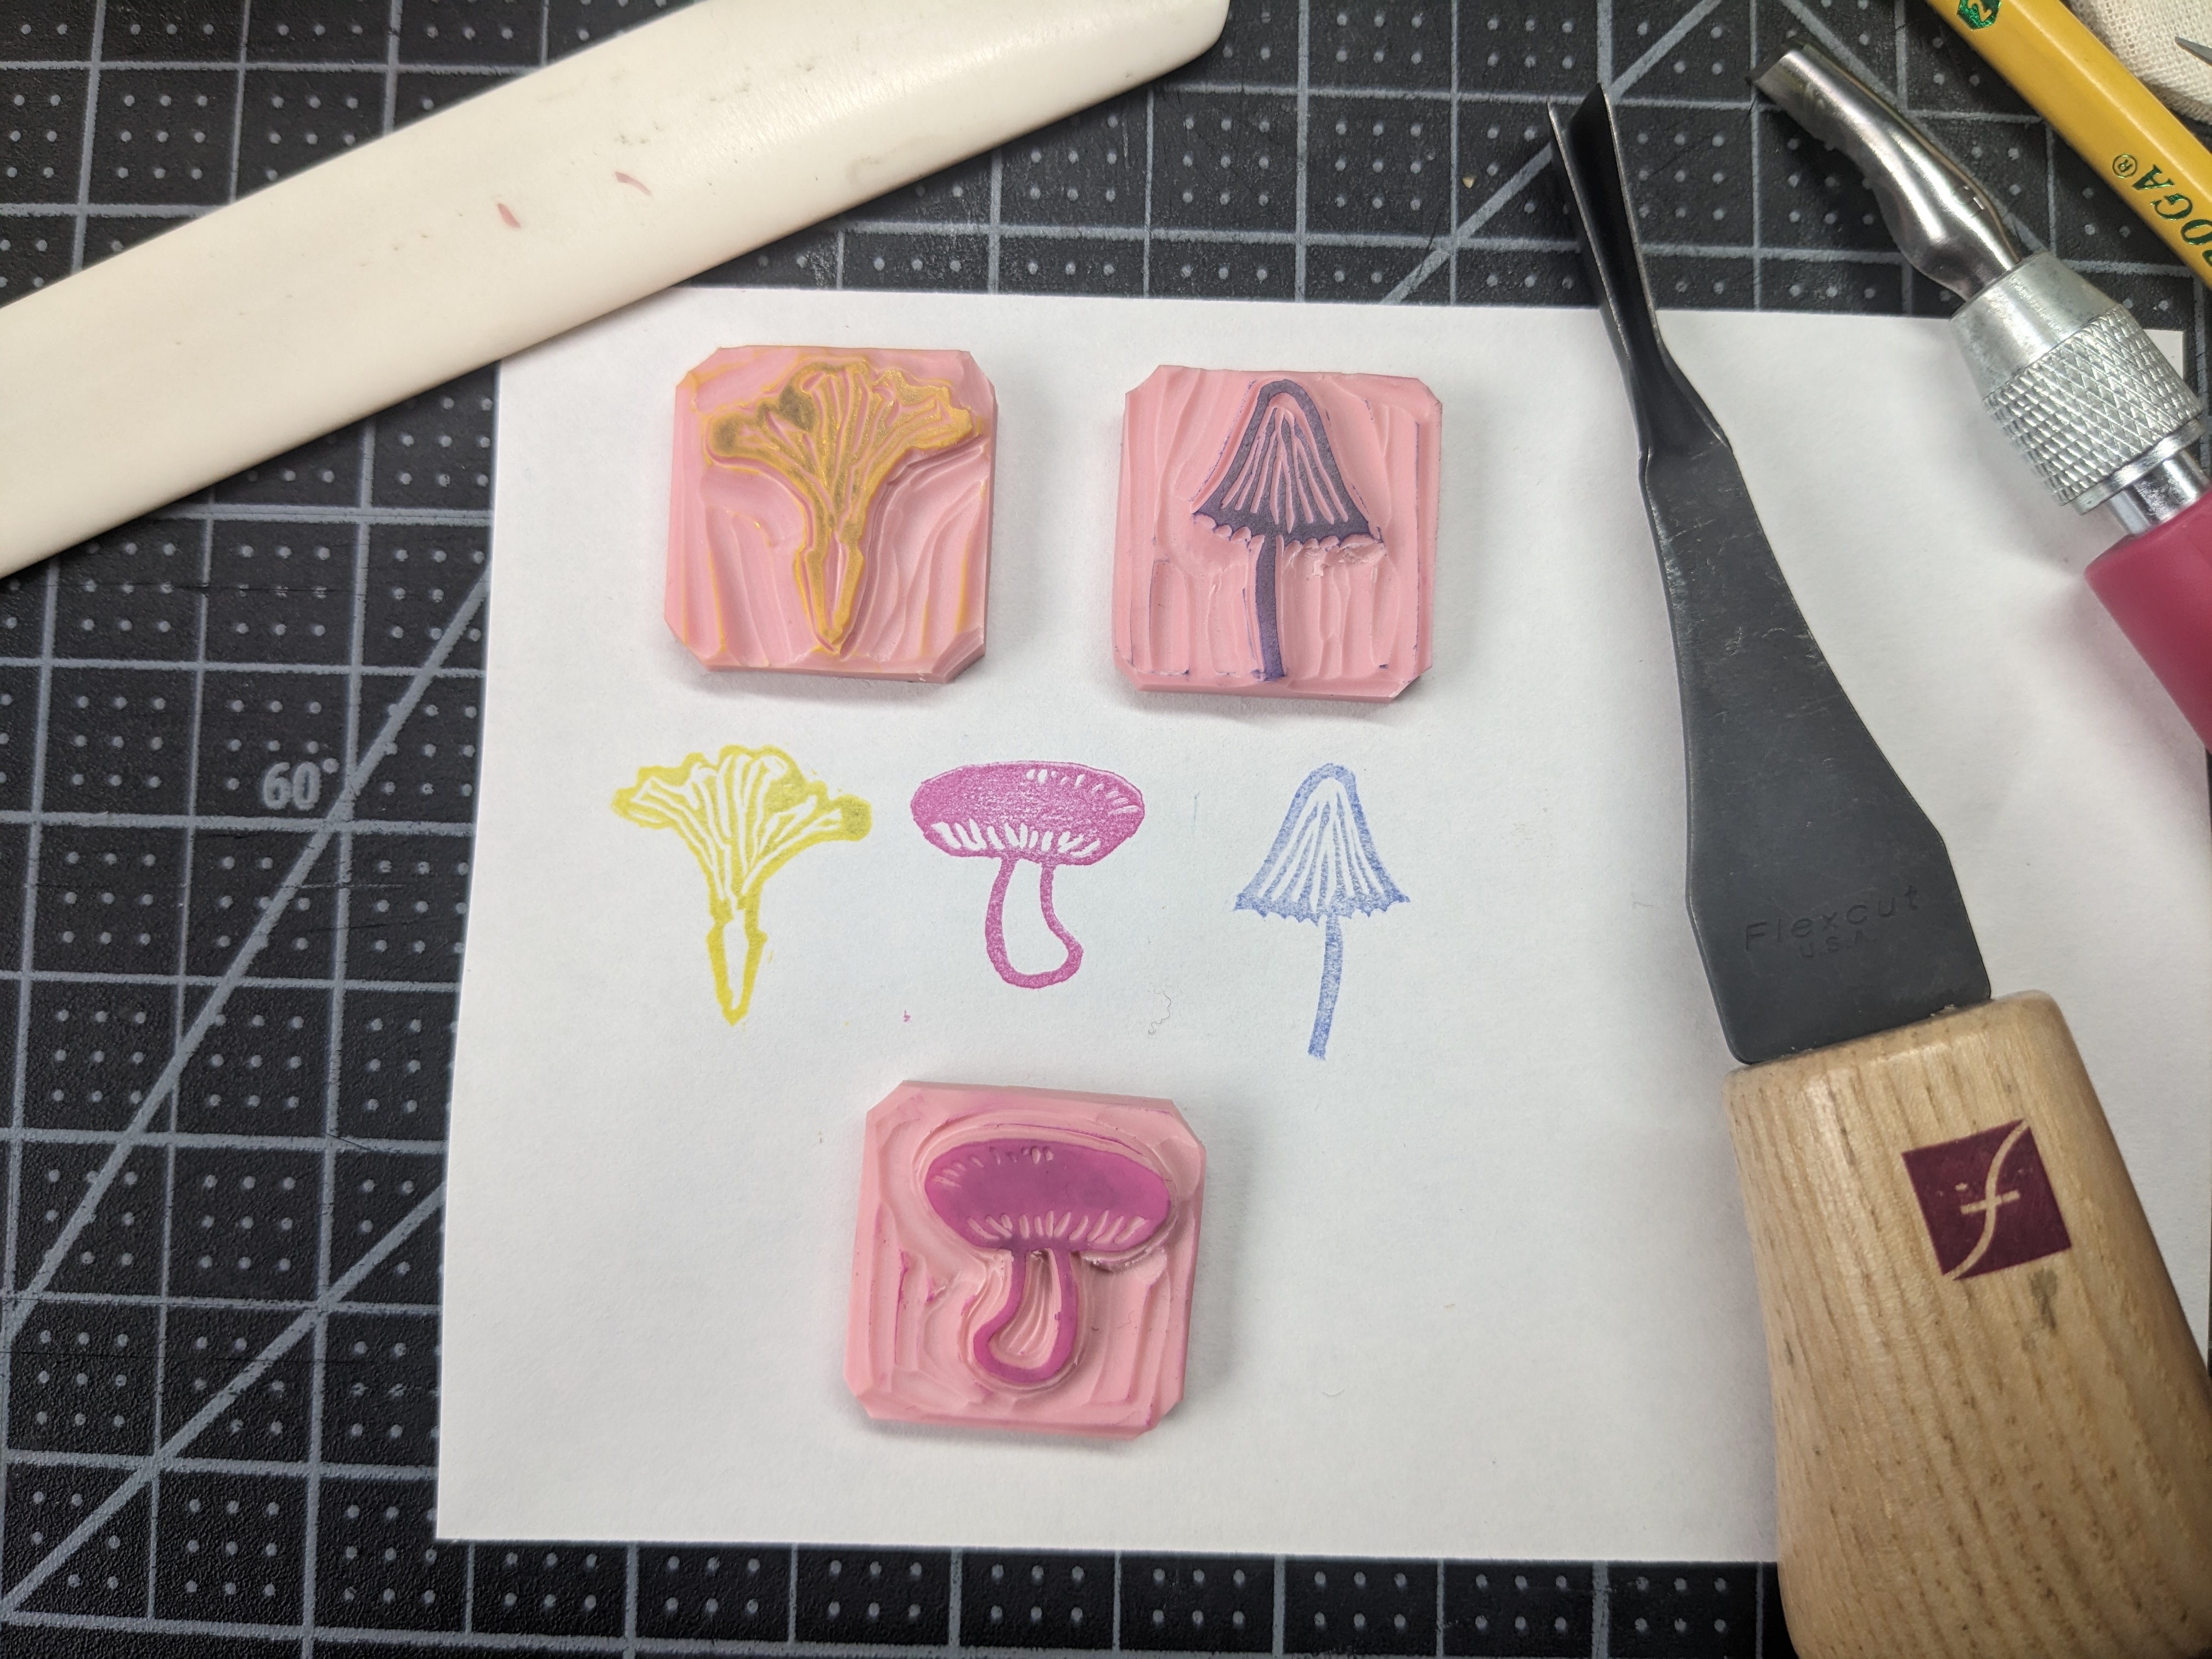 3 tiny mushroom stamps next to their impressions. They are all about 1 inch square. There is a chanterelle in yellow, a russula in pink, and witch's hat mycena in indigo.